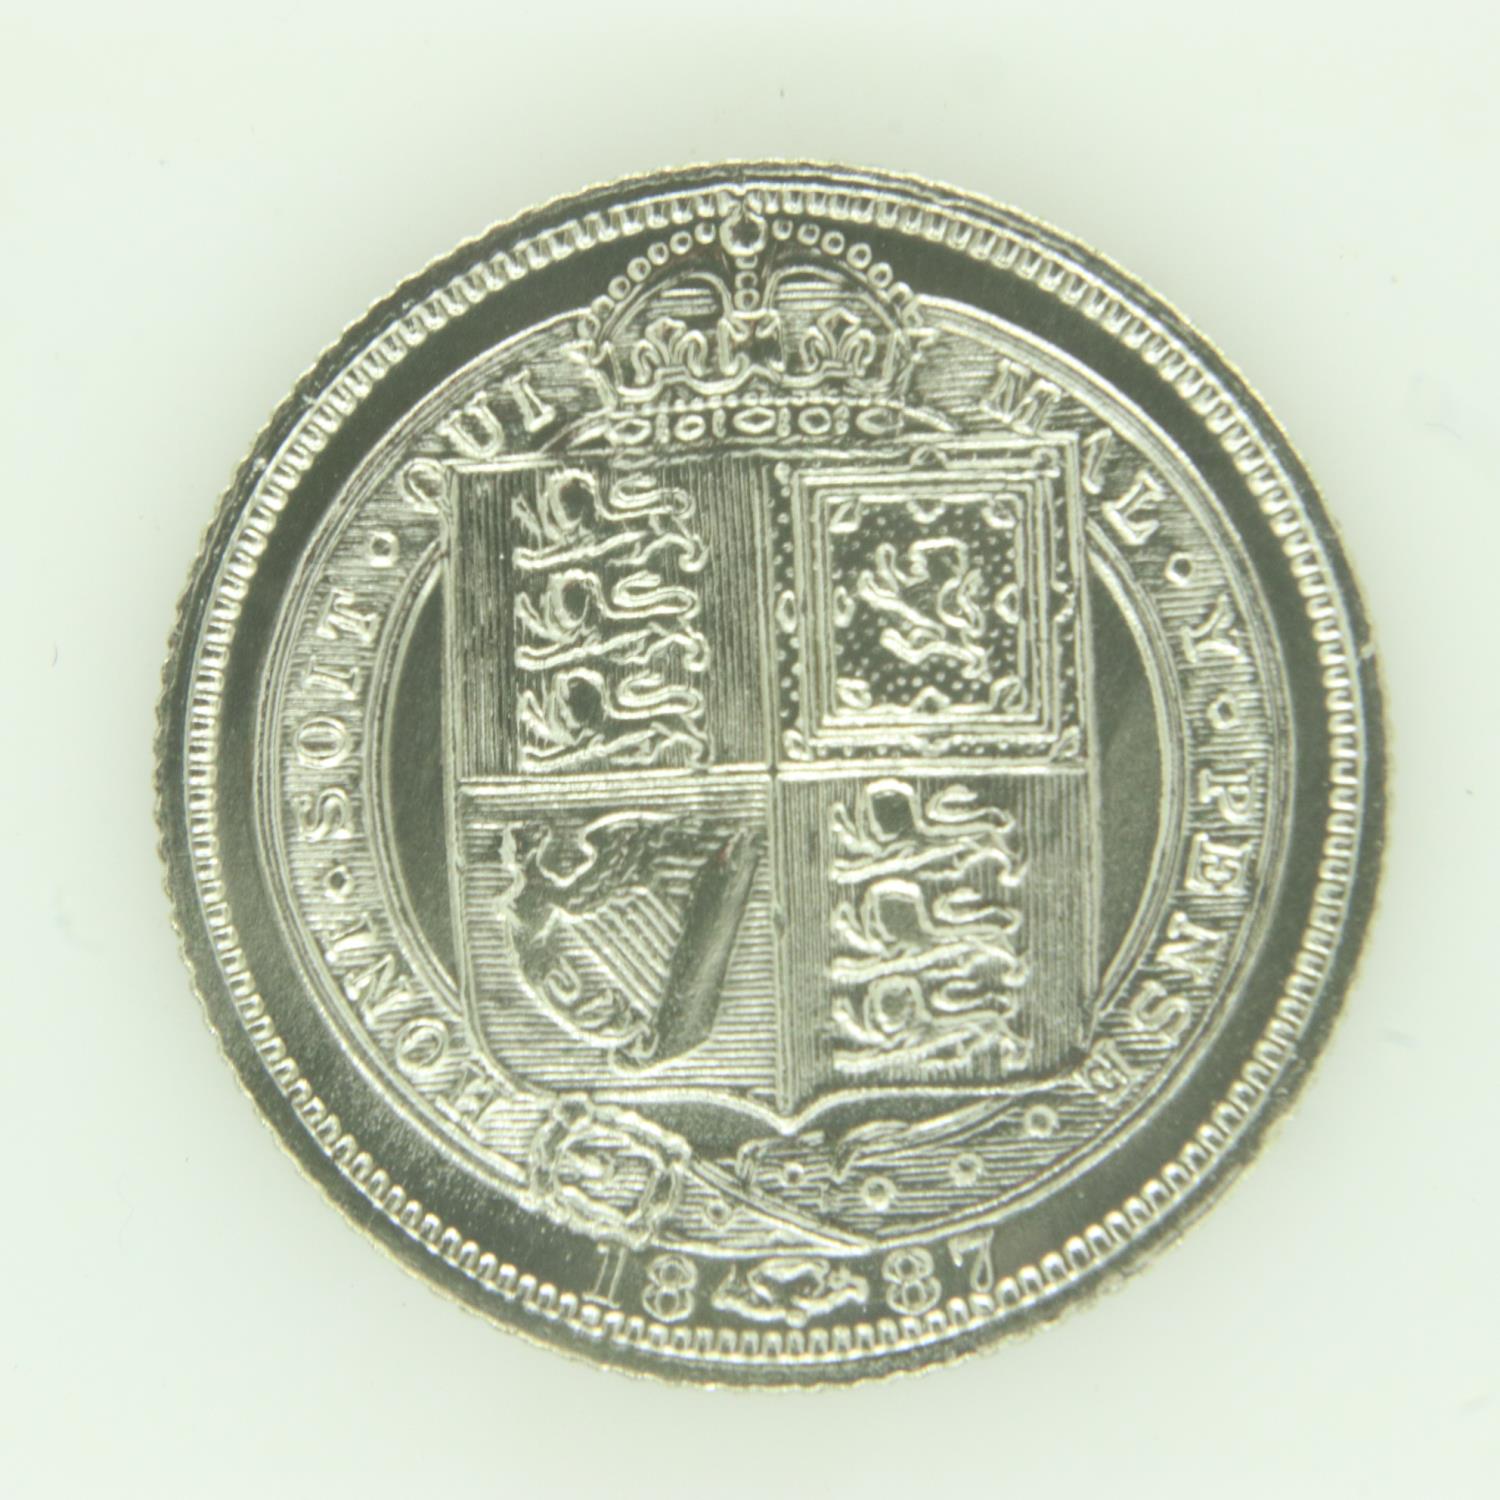 1887 silver sixpence of Queen Victoria - EF grade. UK P&P Group 0 (£6+VAT for the first lot and £1+